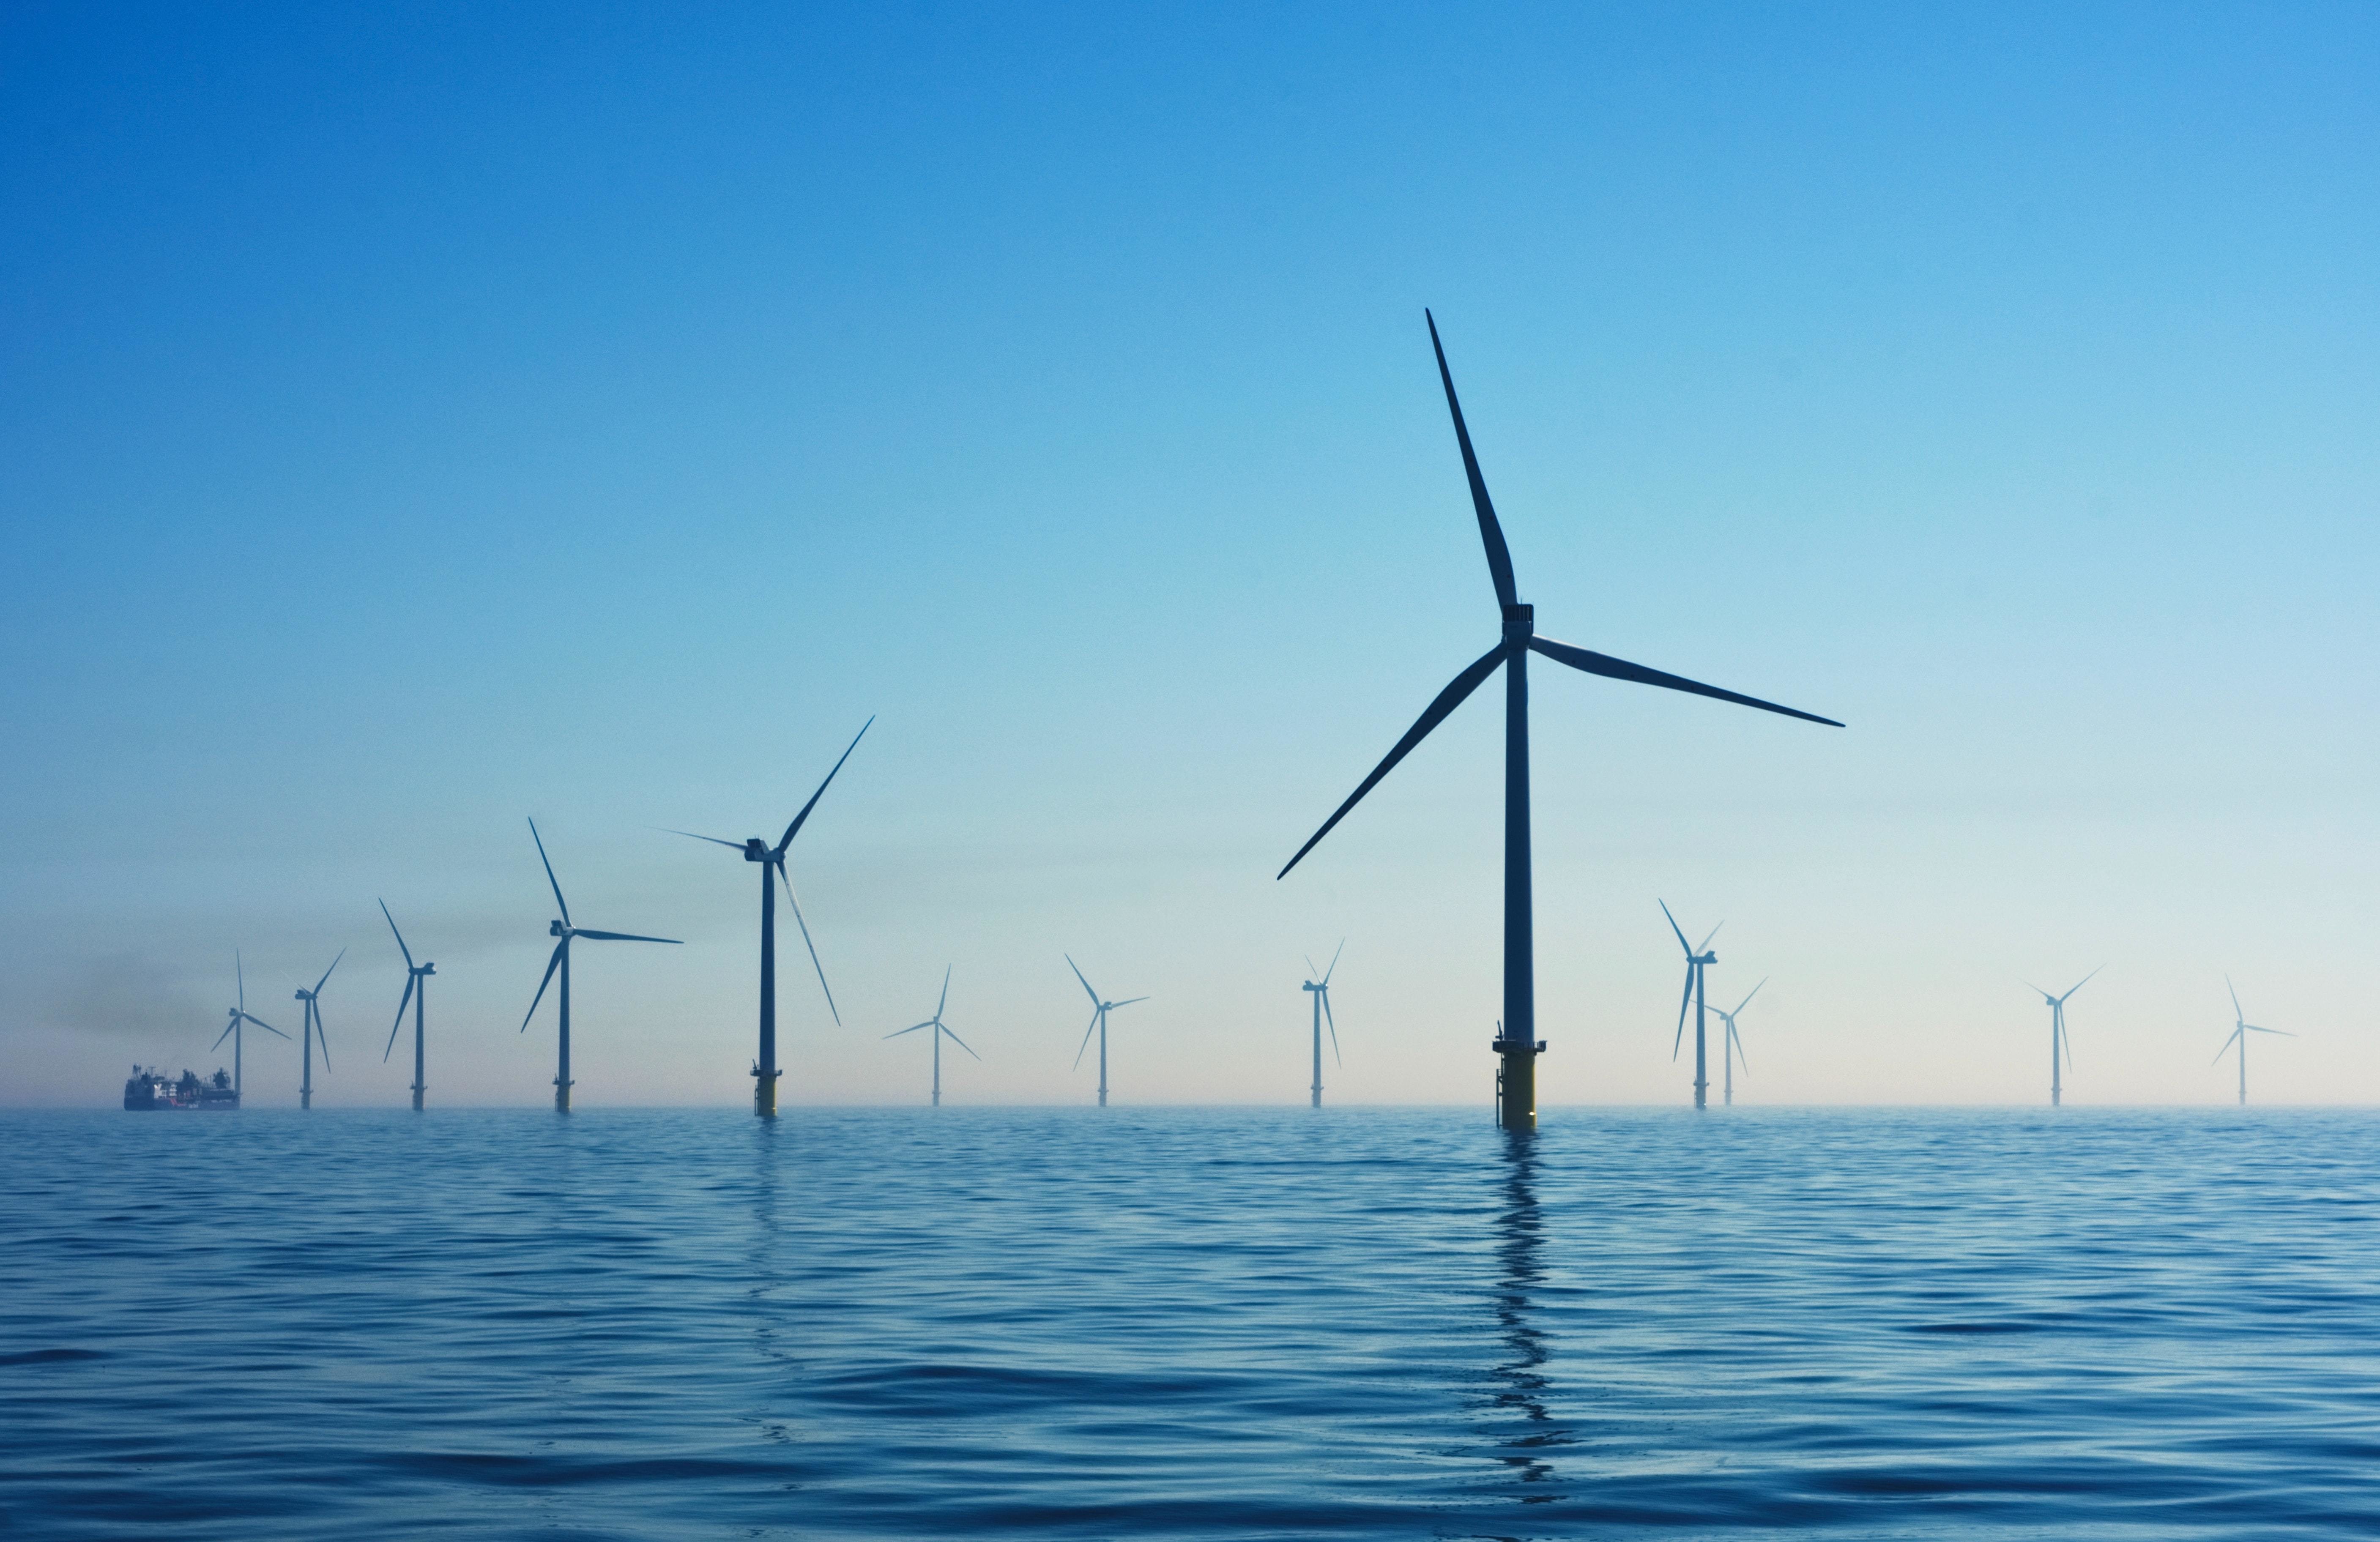 Showcase Image for Offshore wind farm impacts and regulations: Should Nova Scotia learn from Europe?